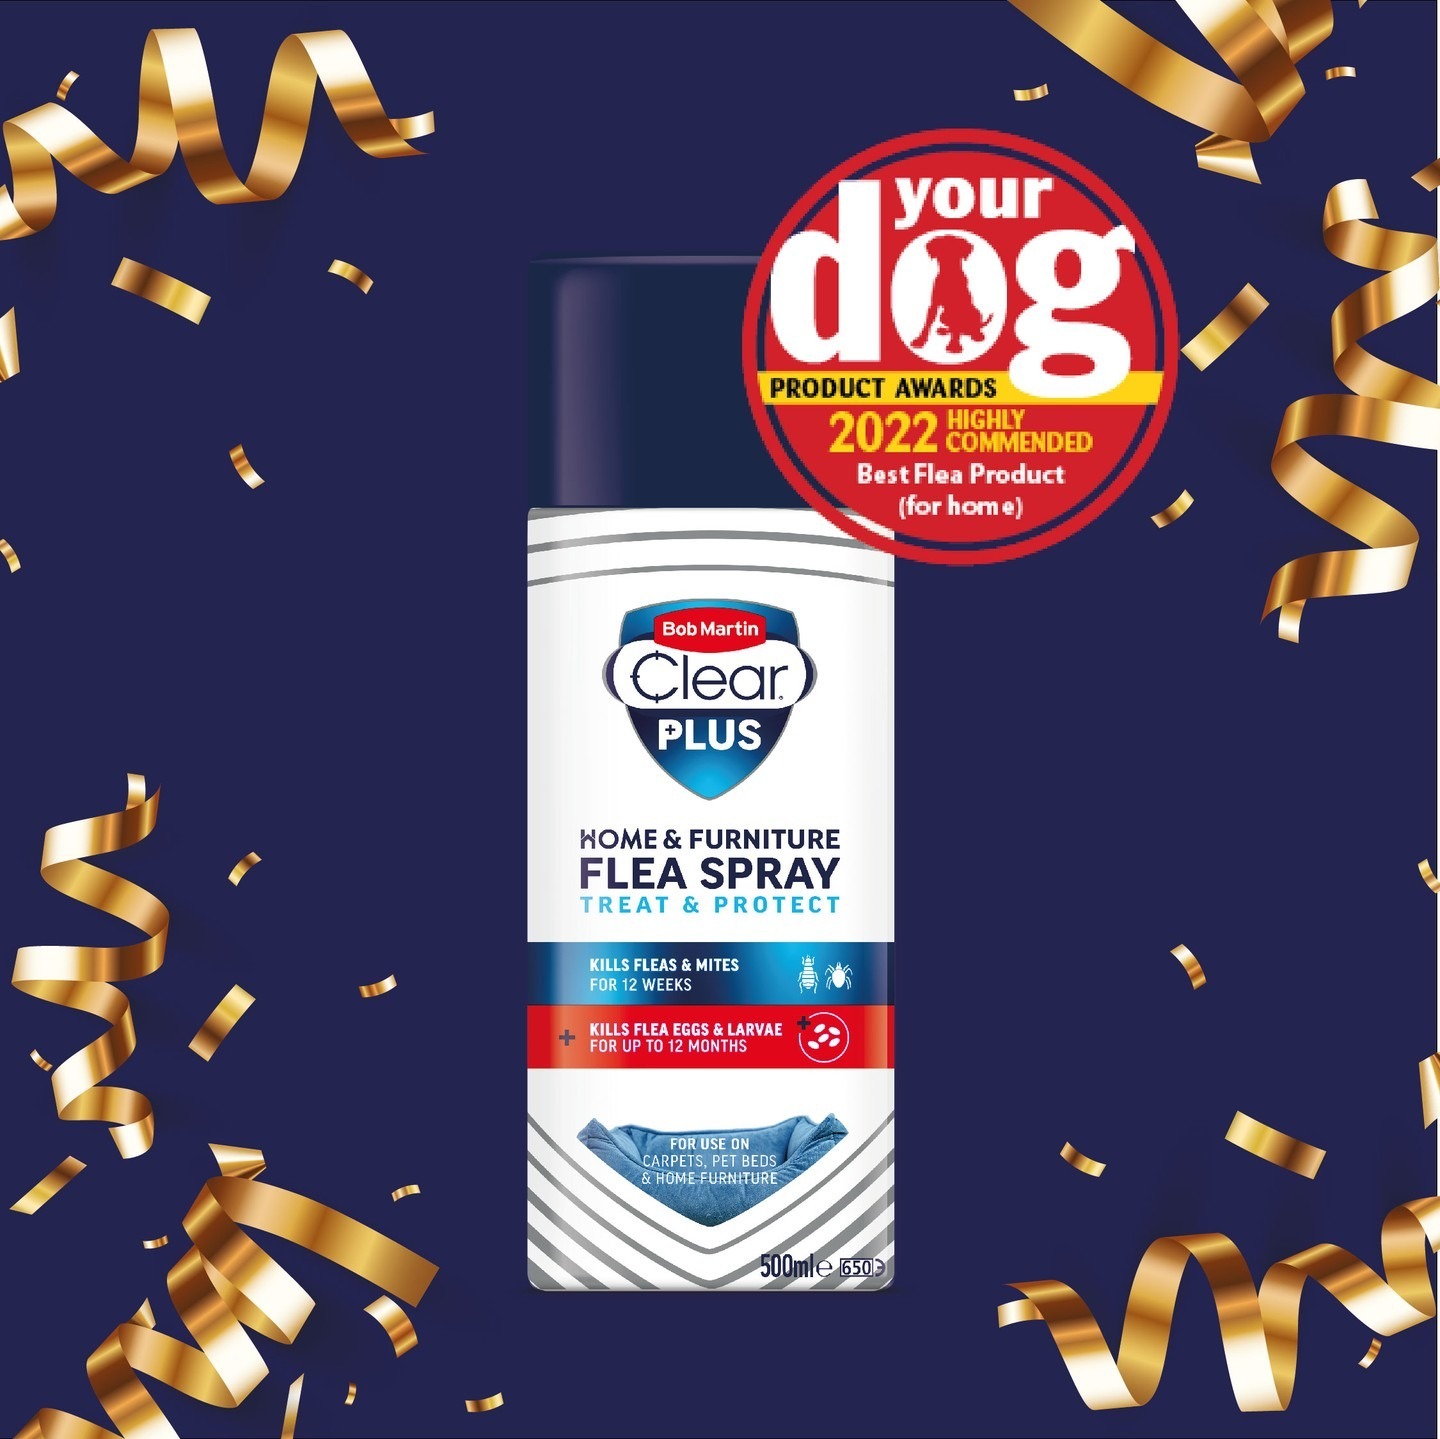 We are super proud to announce that our Clear Plus Spray has been presented a Highly Commended Award for Best Flea Product in the Your Dog Product Awards 🙌 Thank you so much to everyone who voted for us! 

#BobMartin #PetHealthcare #Flea #Worm #Dog #Cat #SpotOn #Pets #PetsOfInstagram #PetCare #PetTips #PetHealth #award